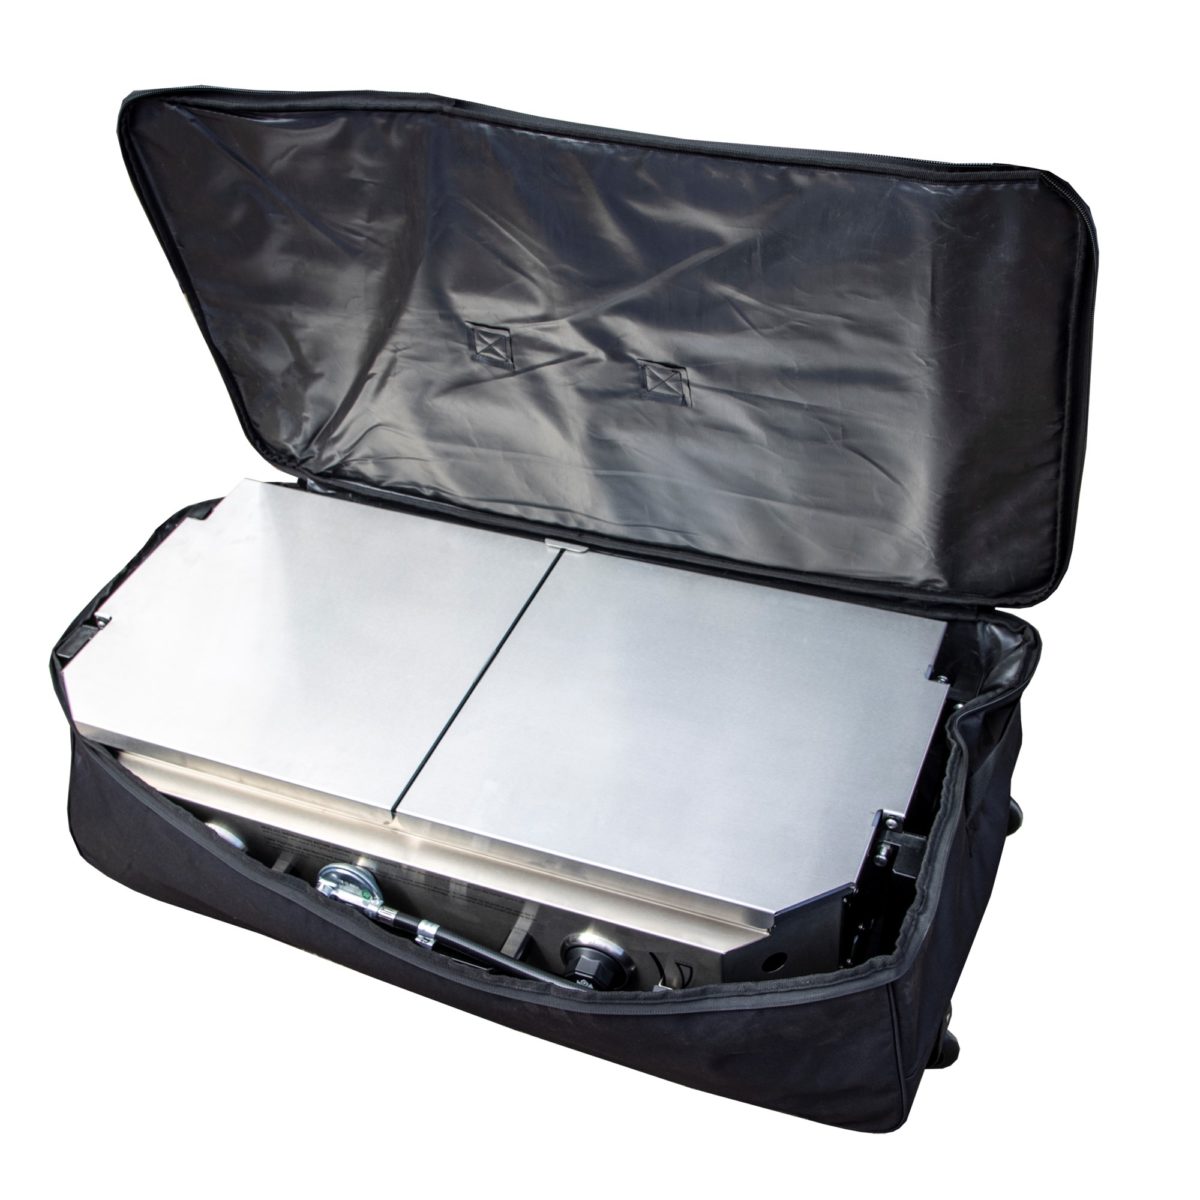 CO10-294 double burner storage case with wheels - open